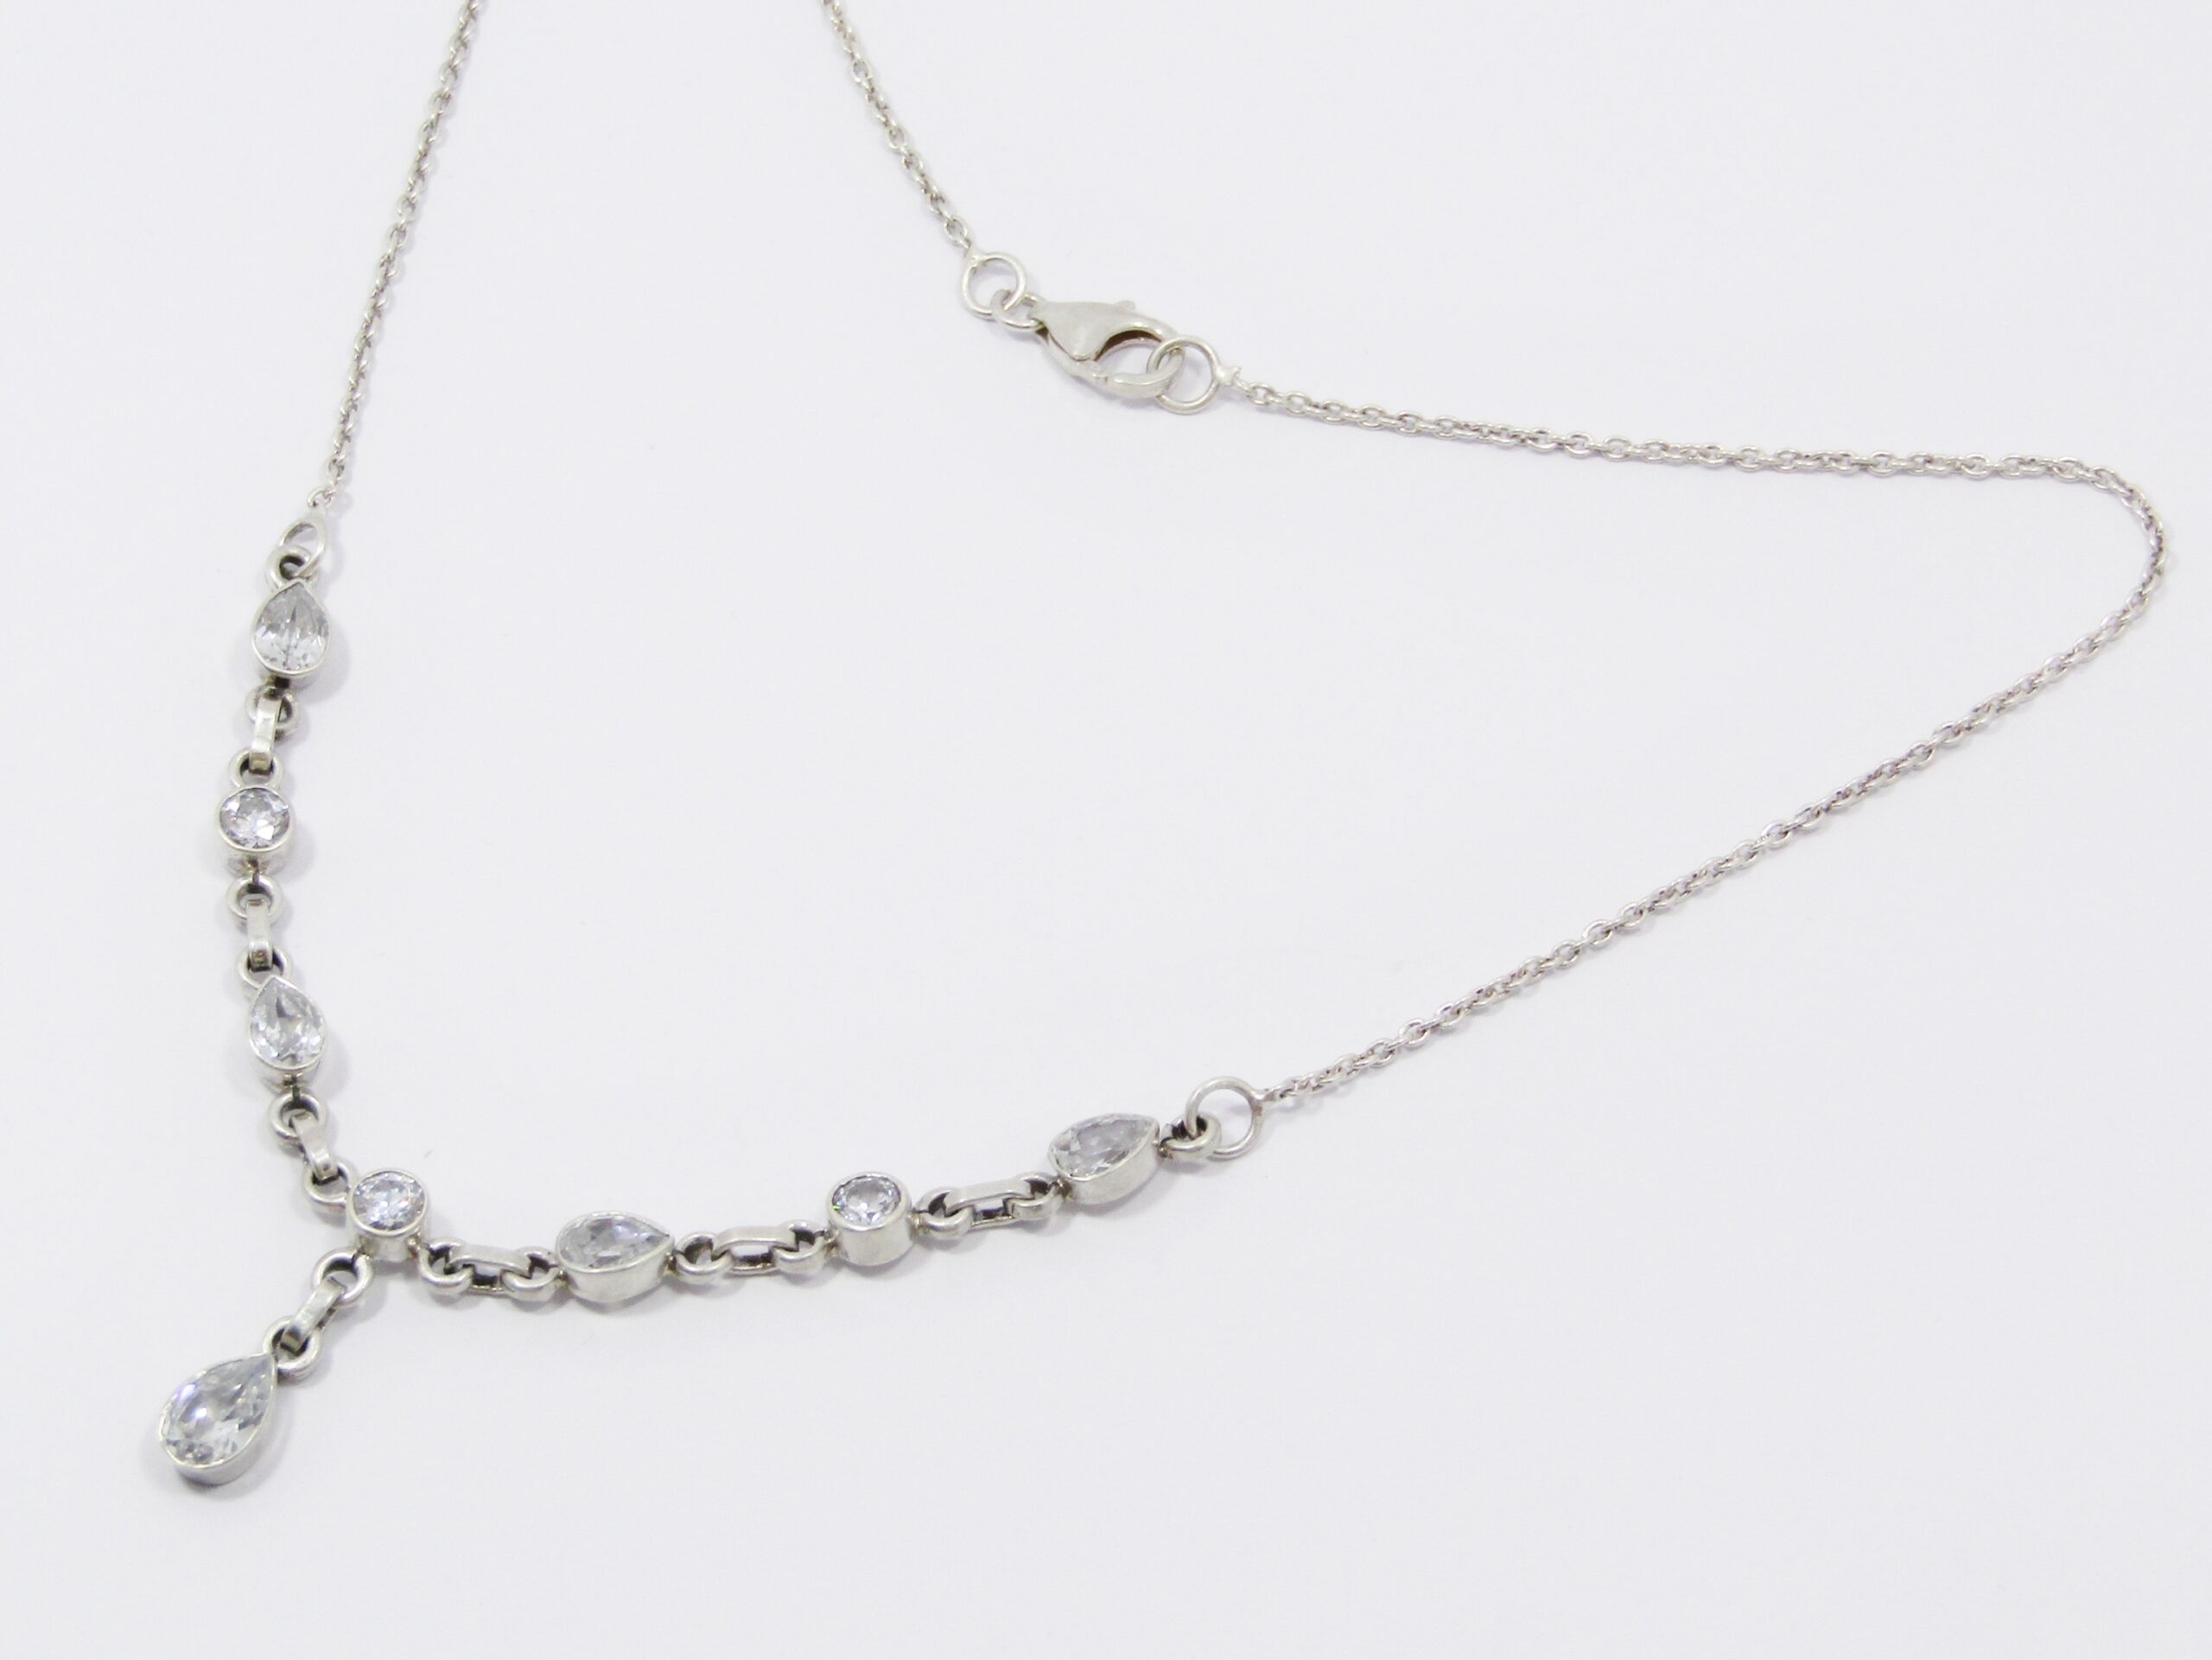 A Stunning Clear Crystal Necklace in Sterling Silver